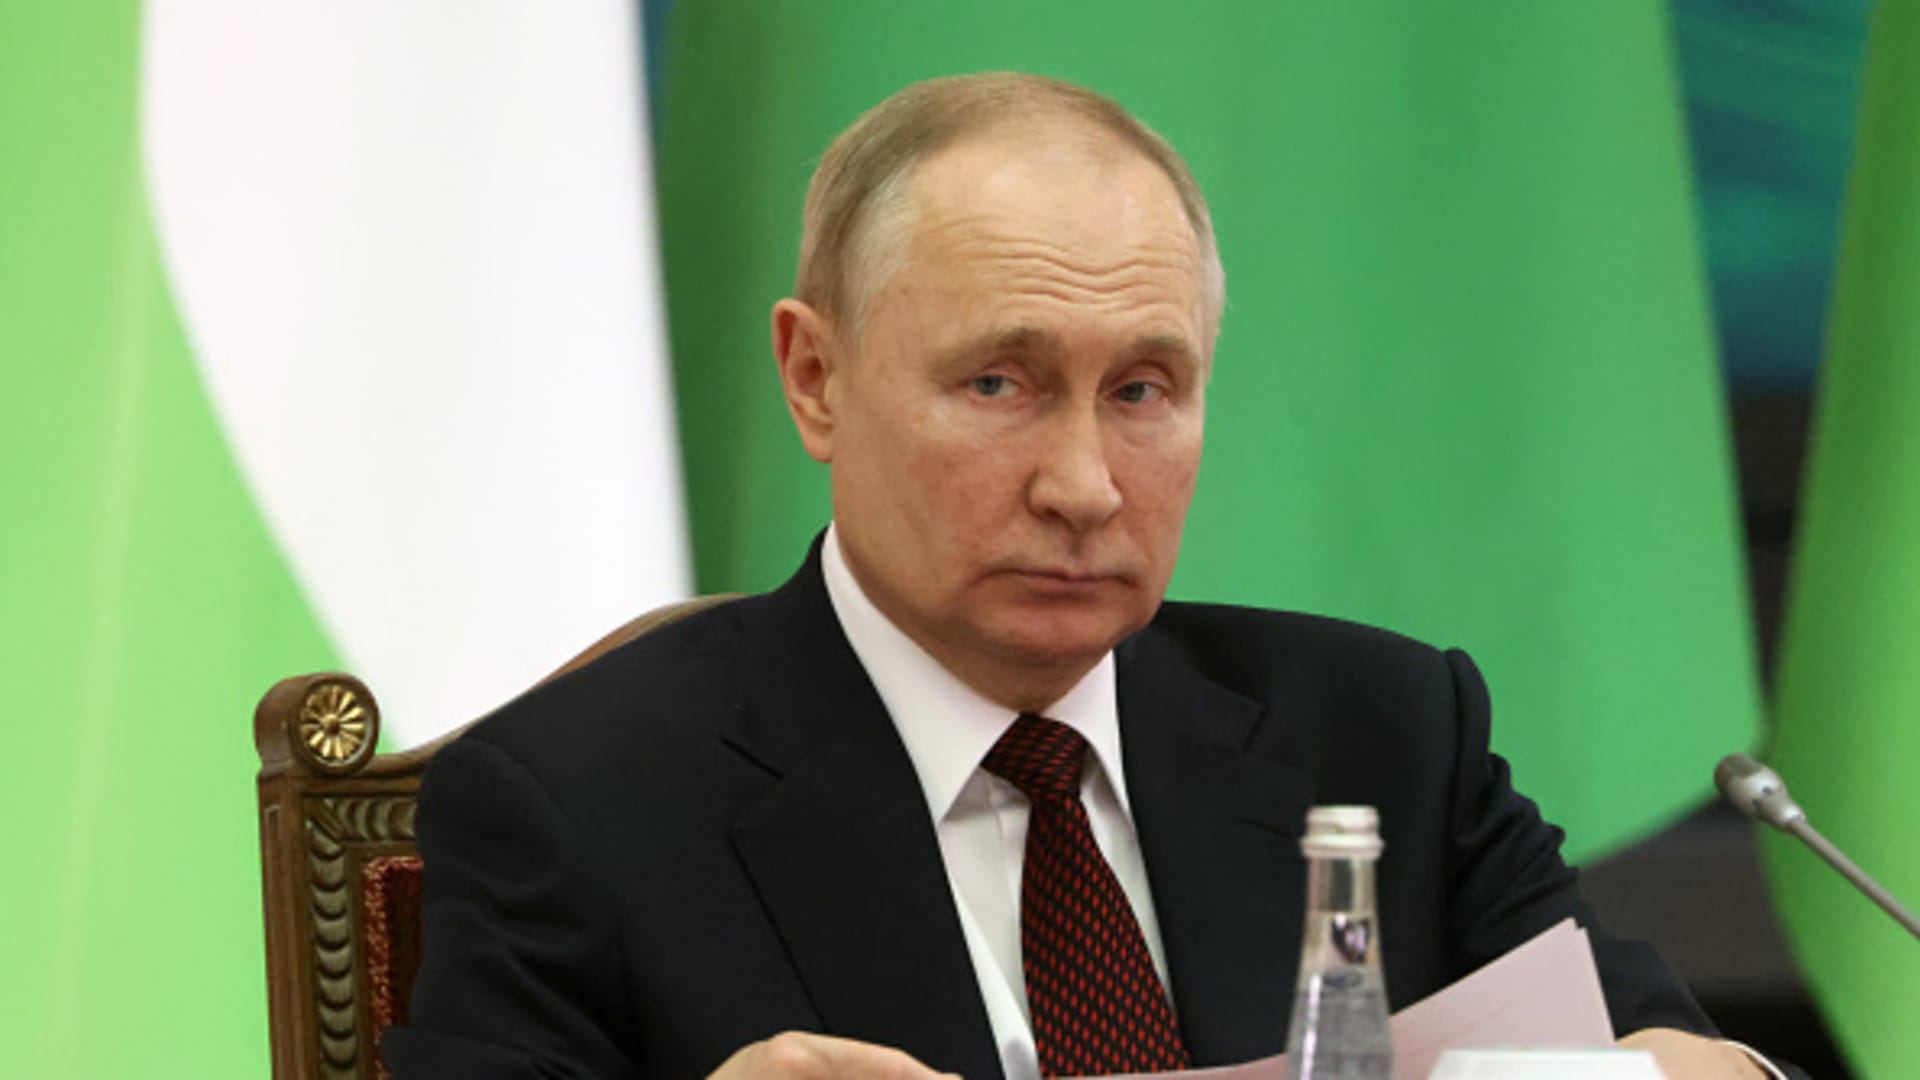 Putin attempts to undermine oil price cap as global energy markets fracture